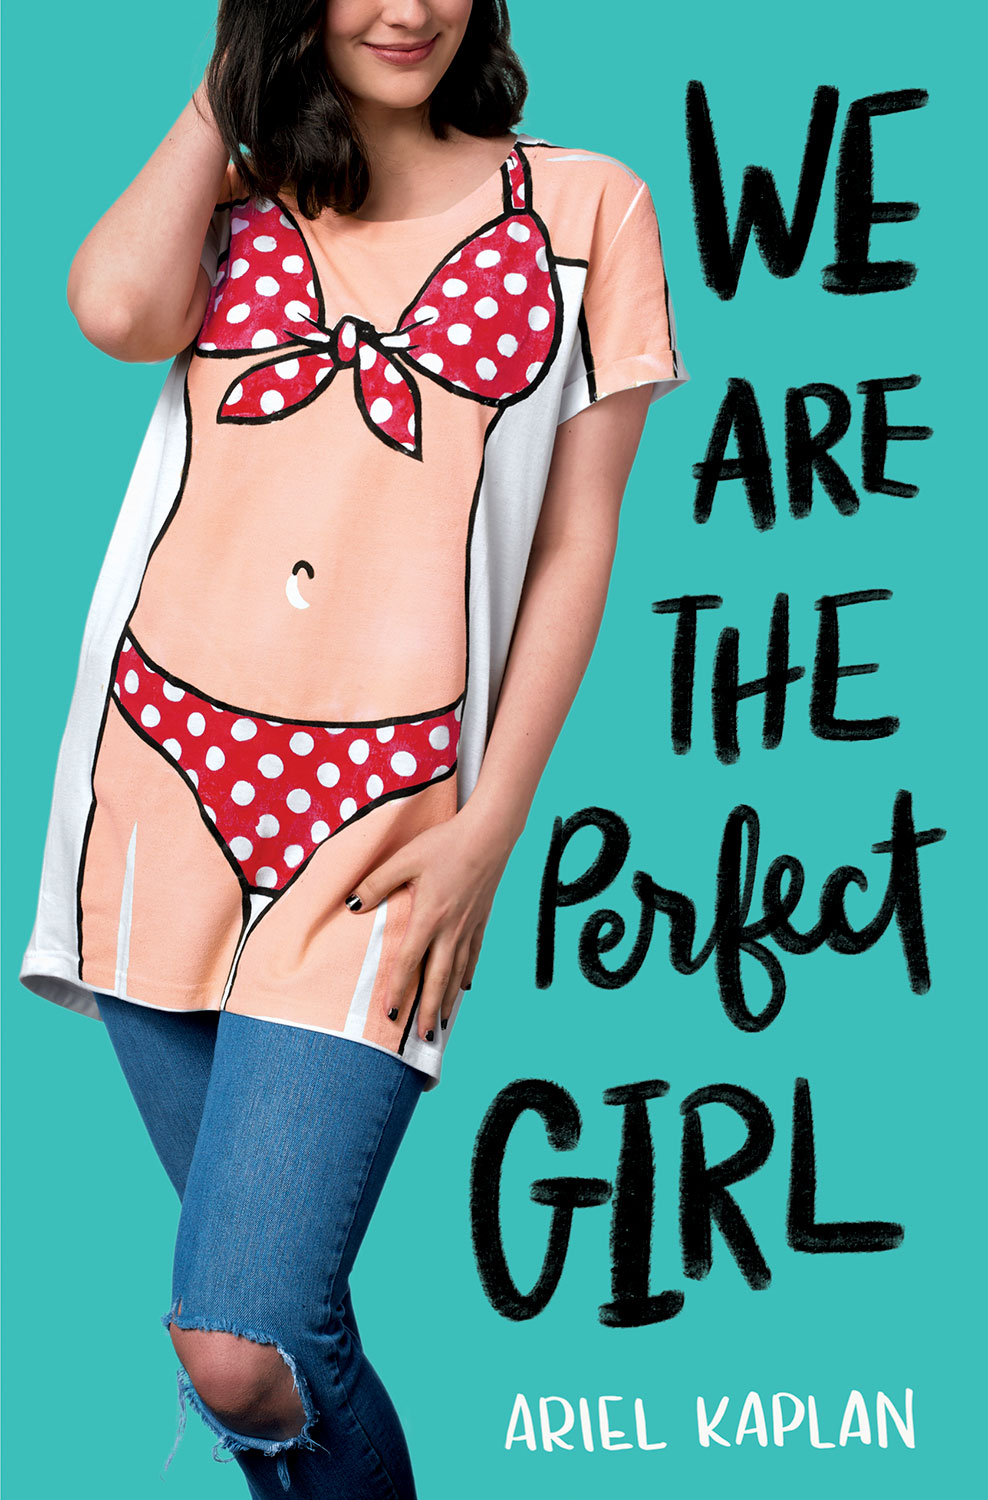 we-are-the-perfect-girl_09.17.18